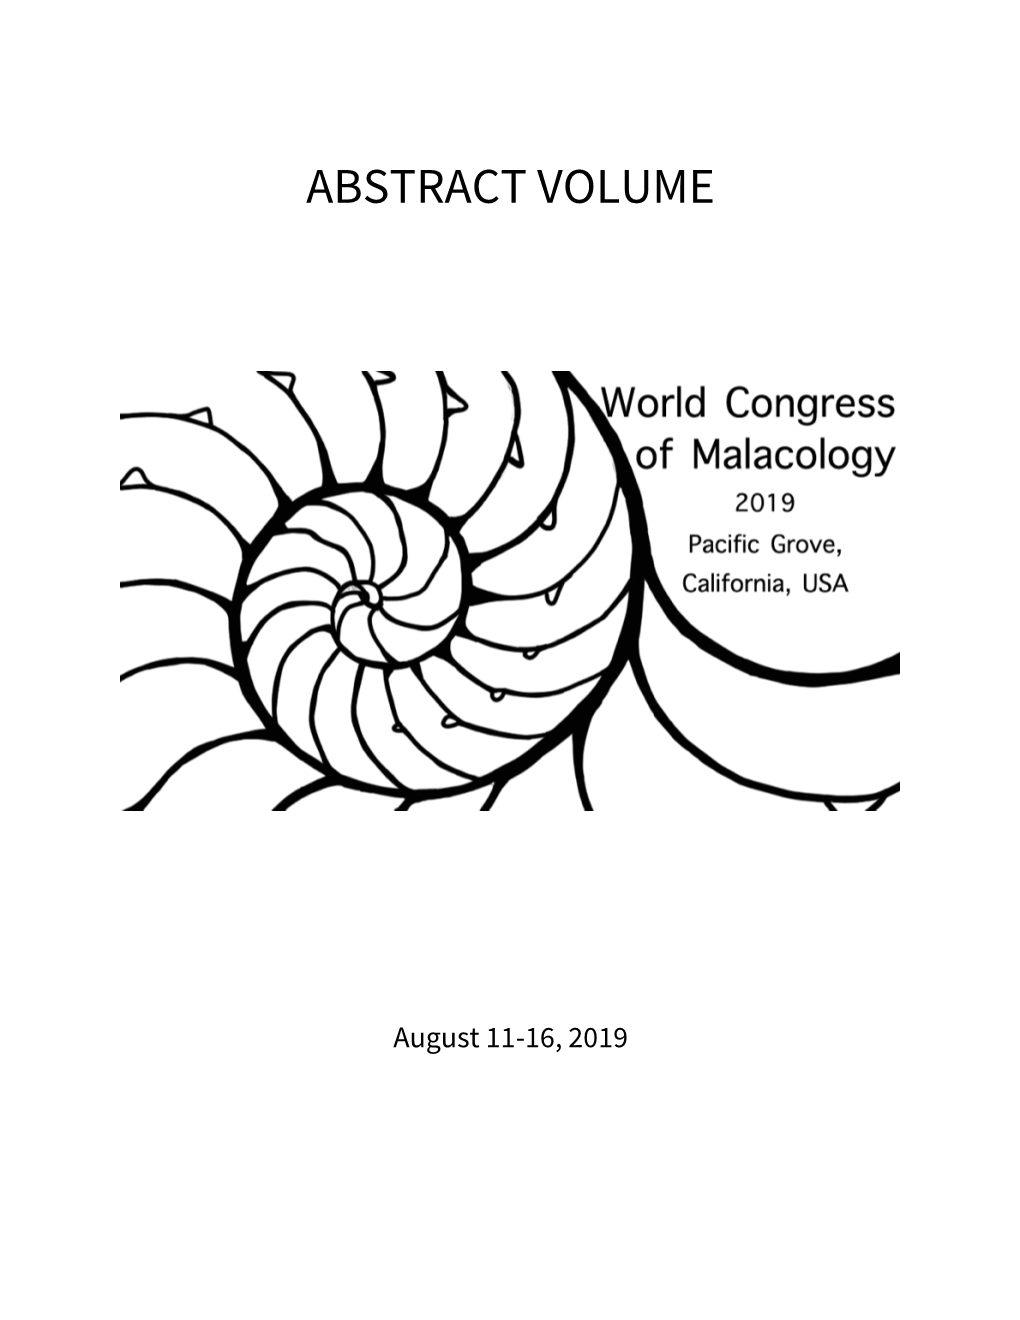 WCM 2019 Abstract Volume